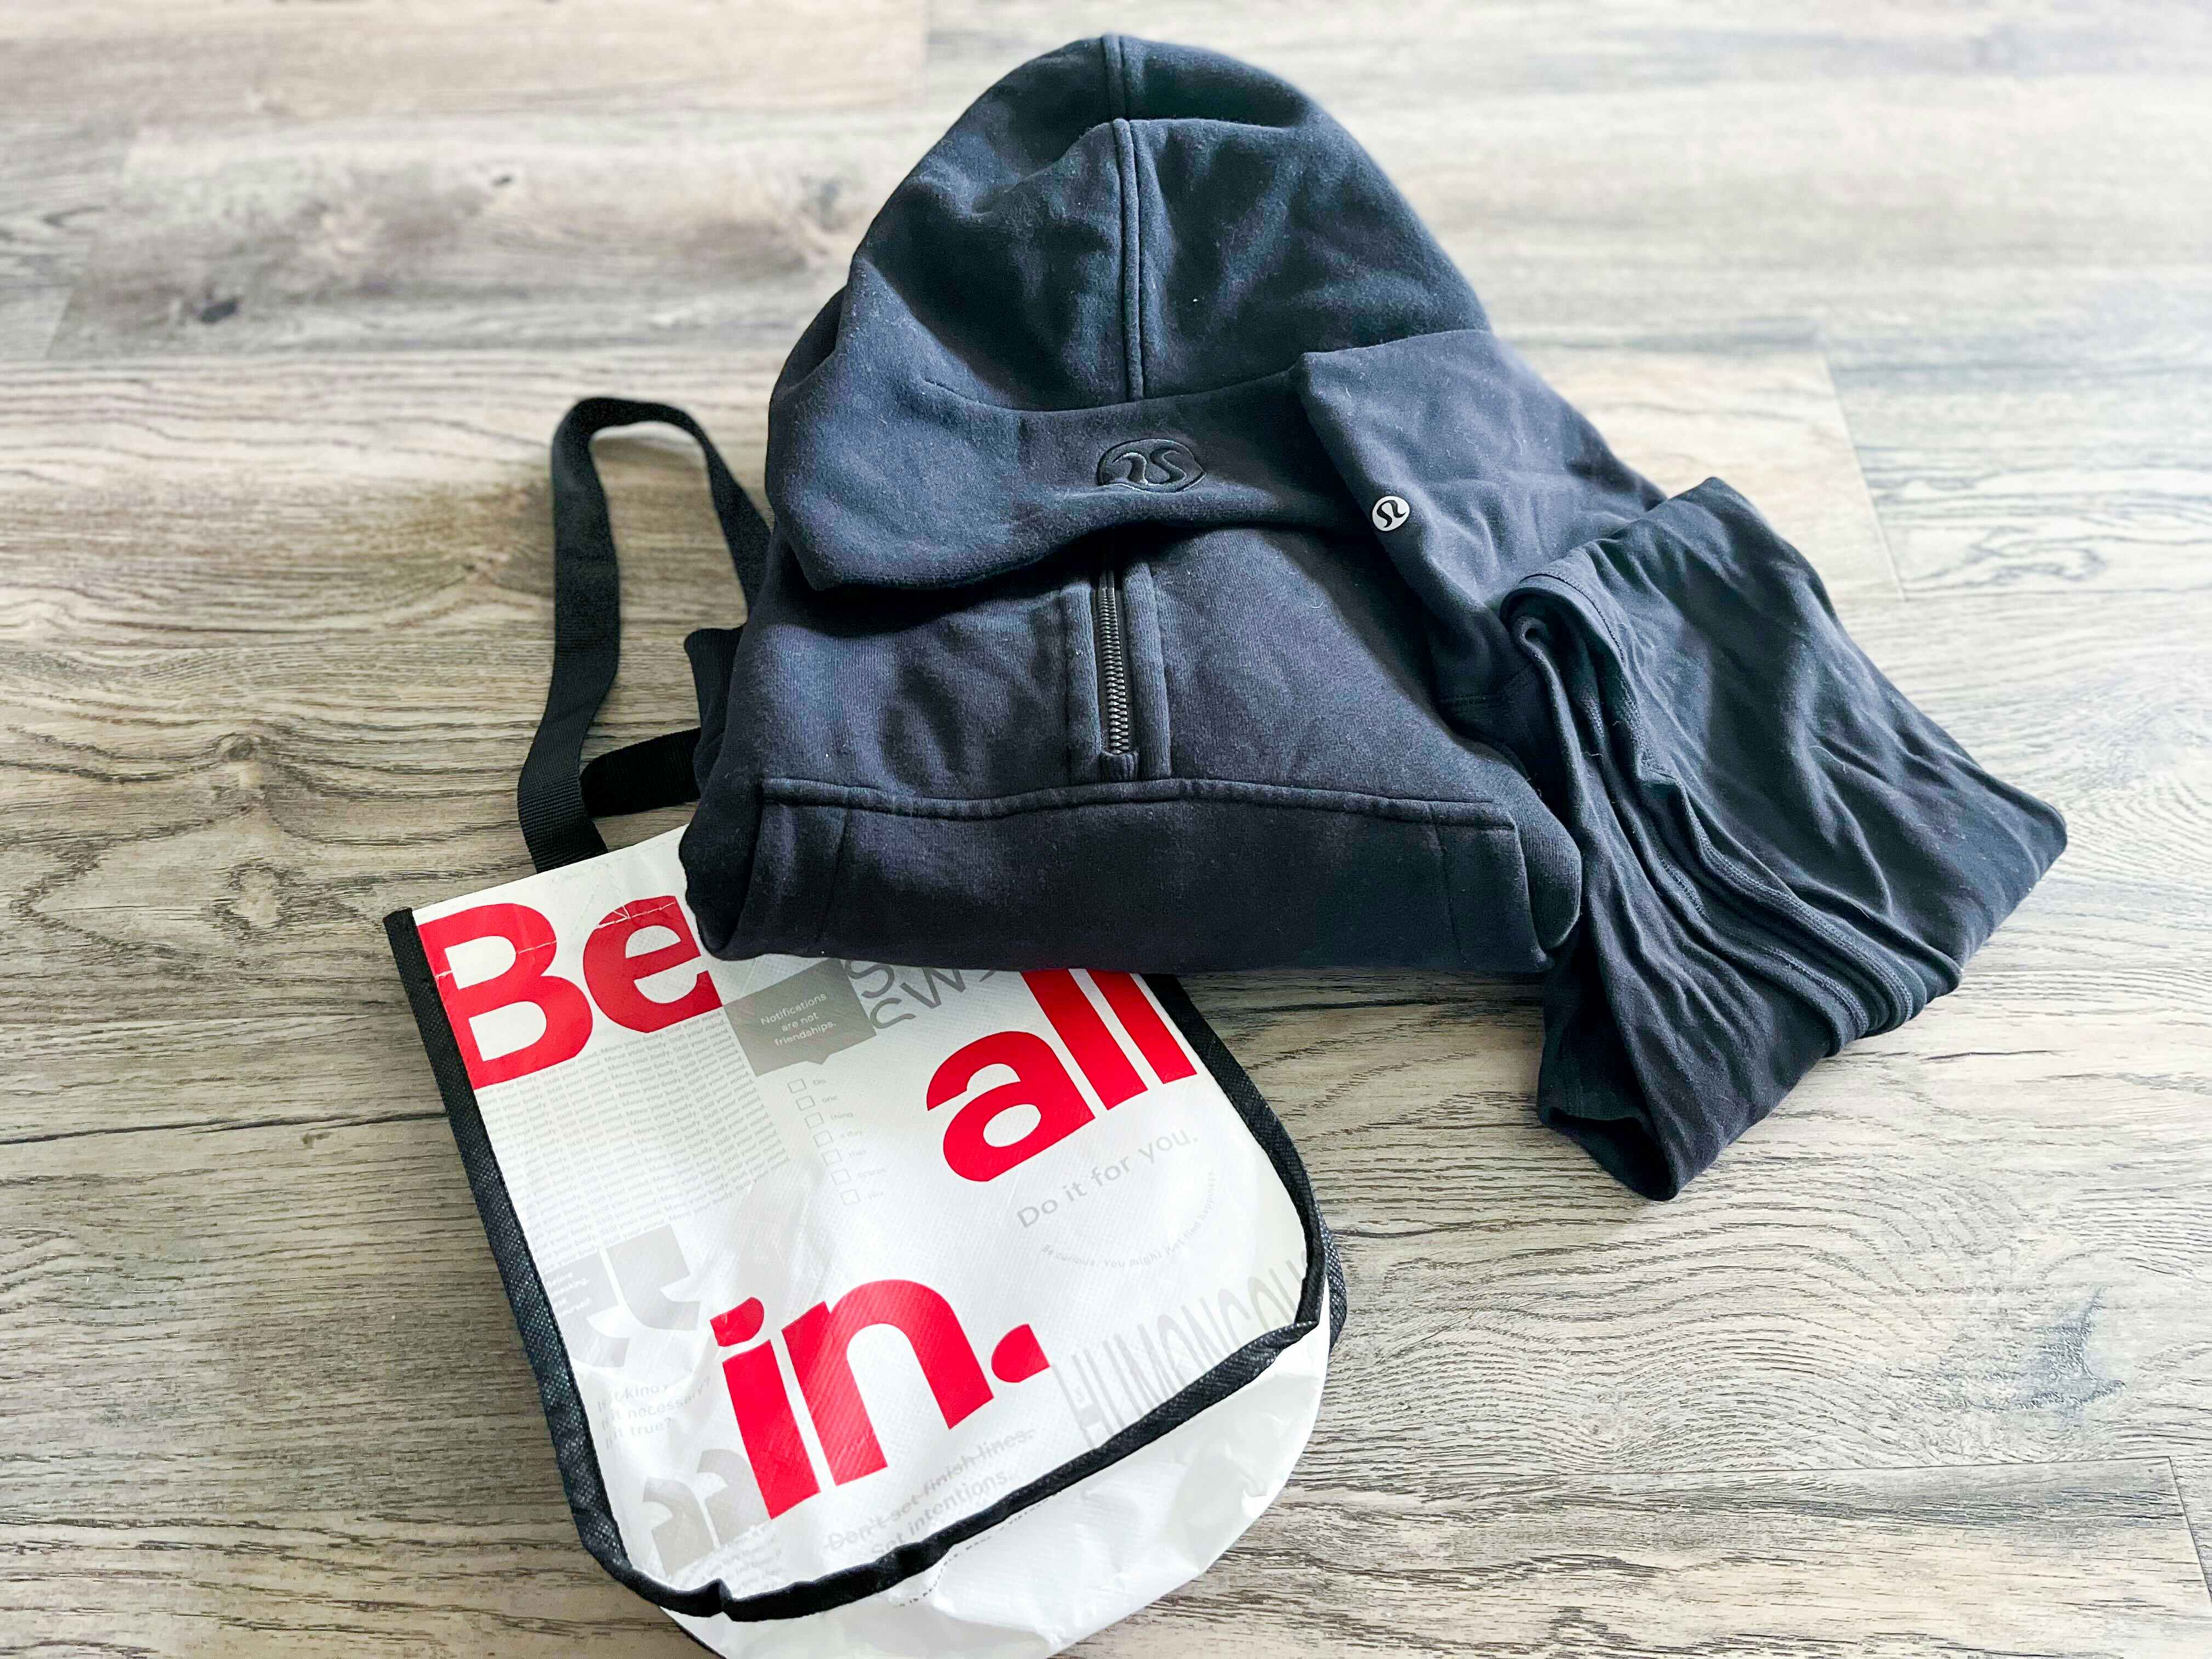 Lululemon Healthcare Discount Can Get You 15% Off — Here's How - The Krazy  Coupon Lady